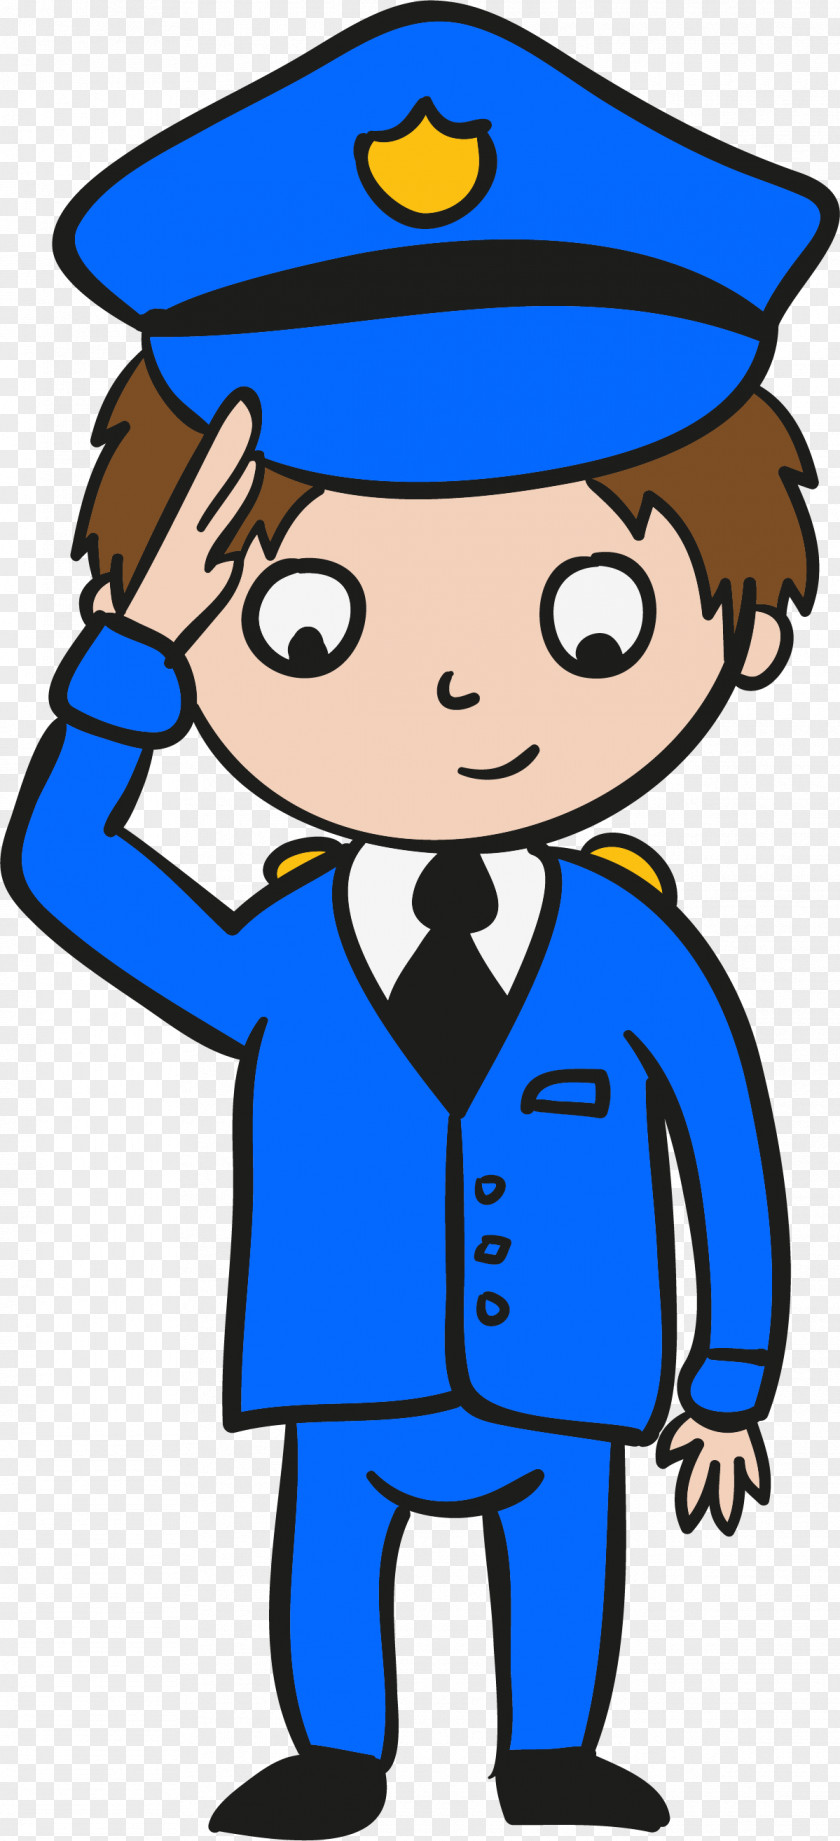 Cartoon Hand-painted Police Salute Officer Alarm Device PNG